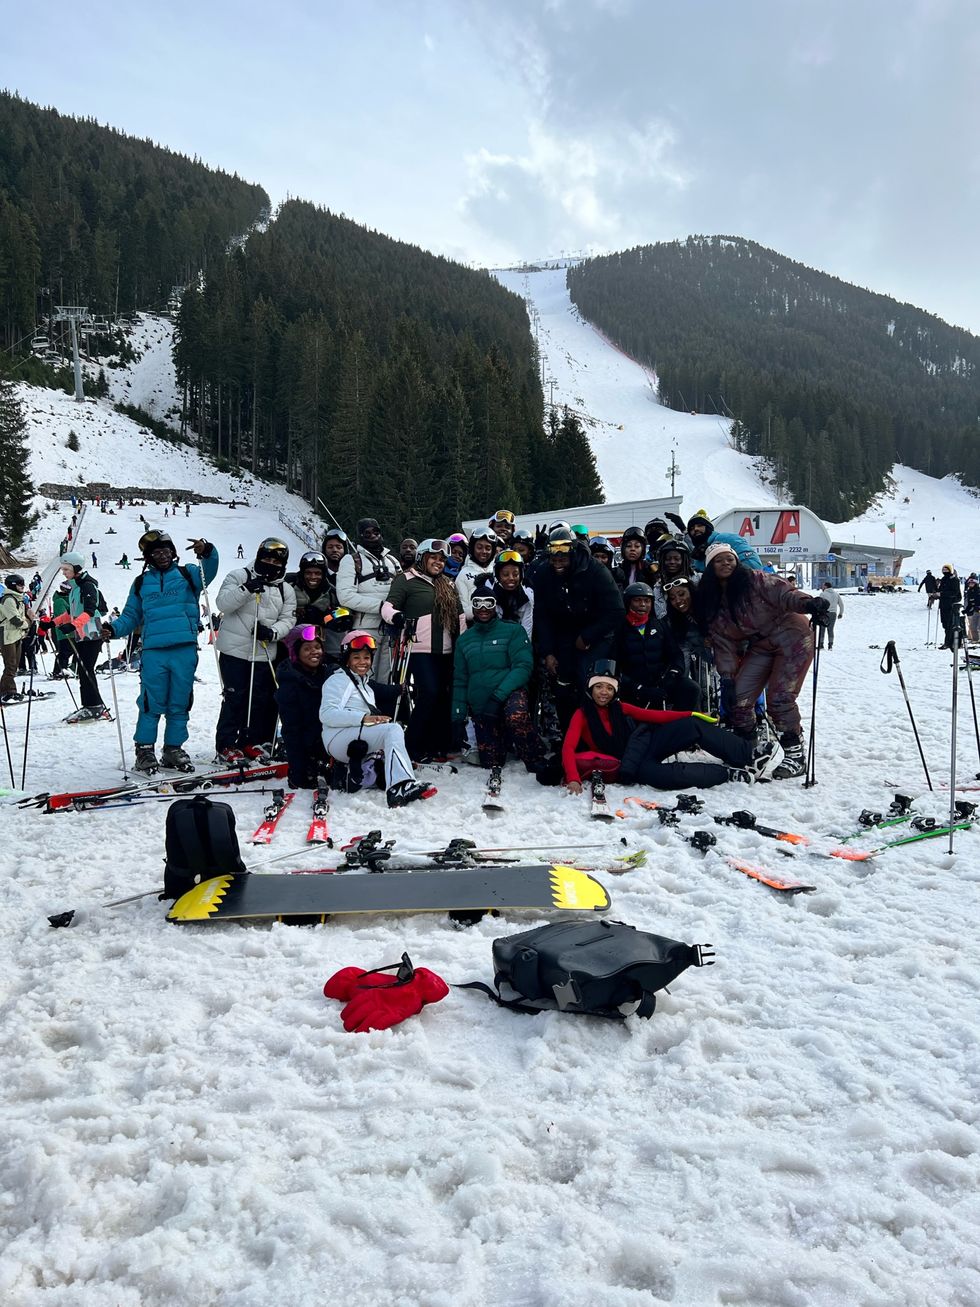 The British skiing group promoting inclusivity and community on the slopes